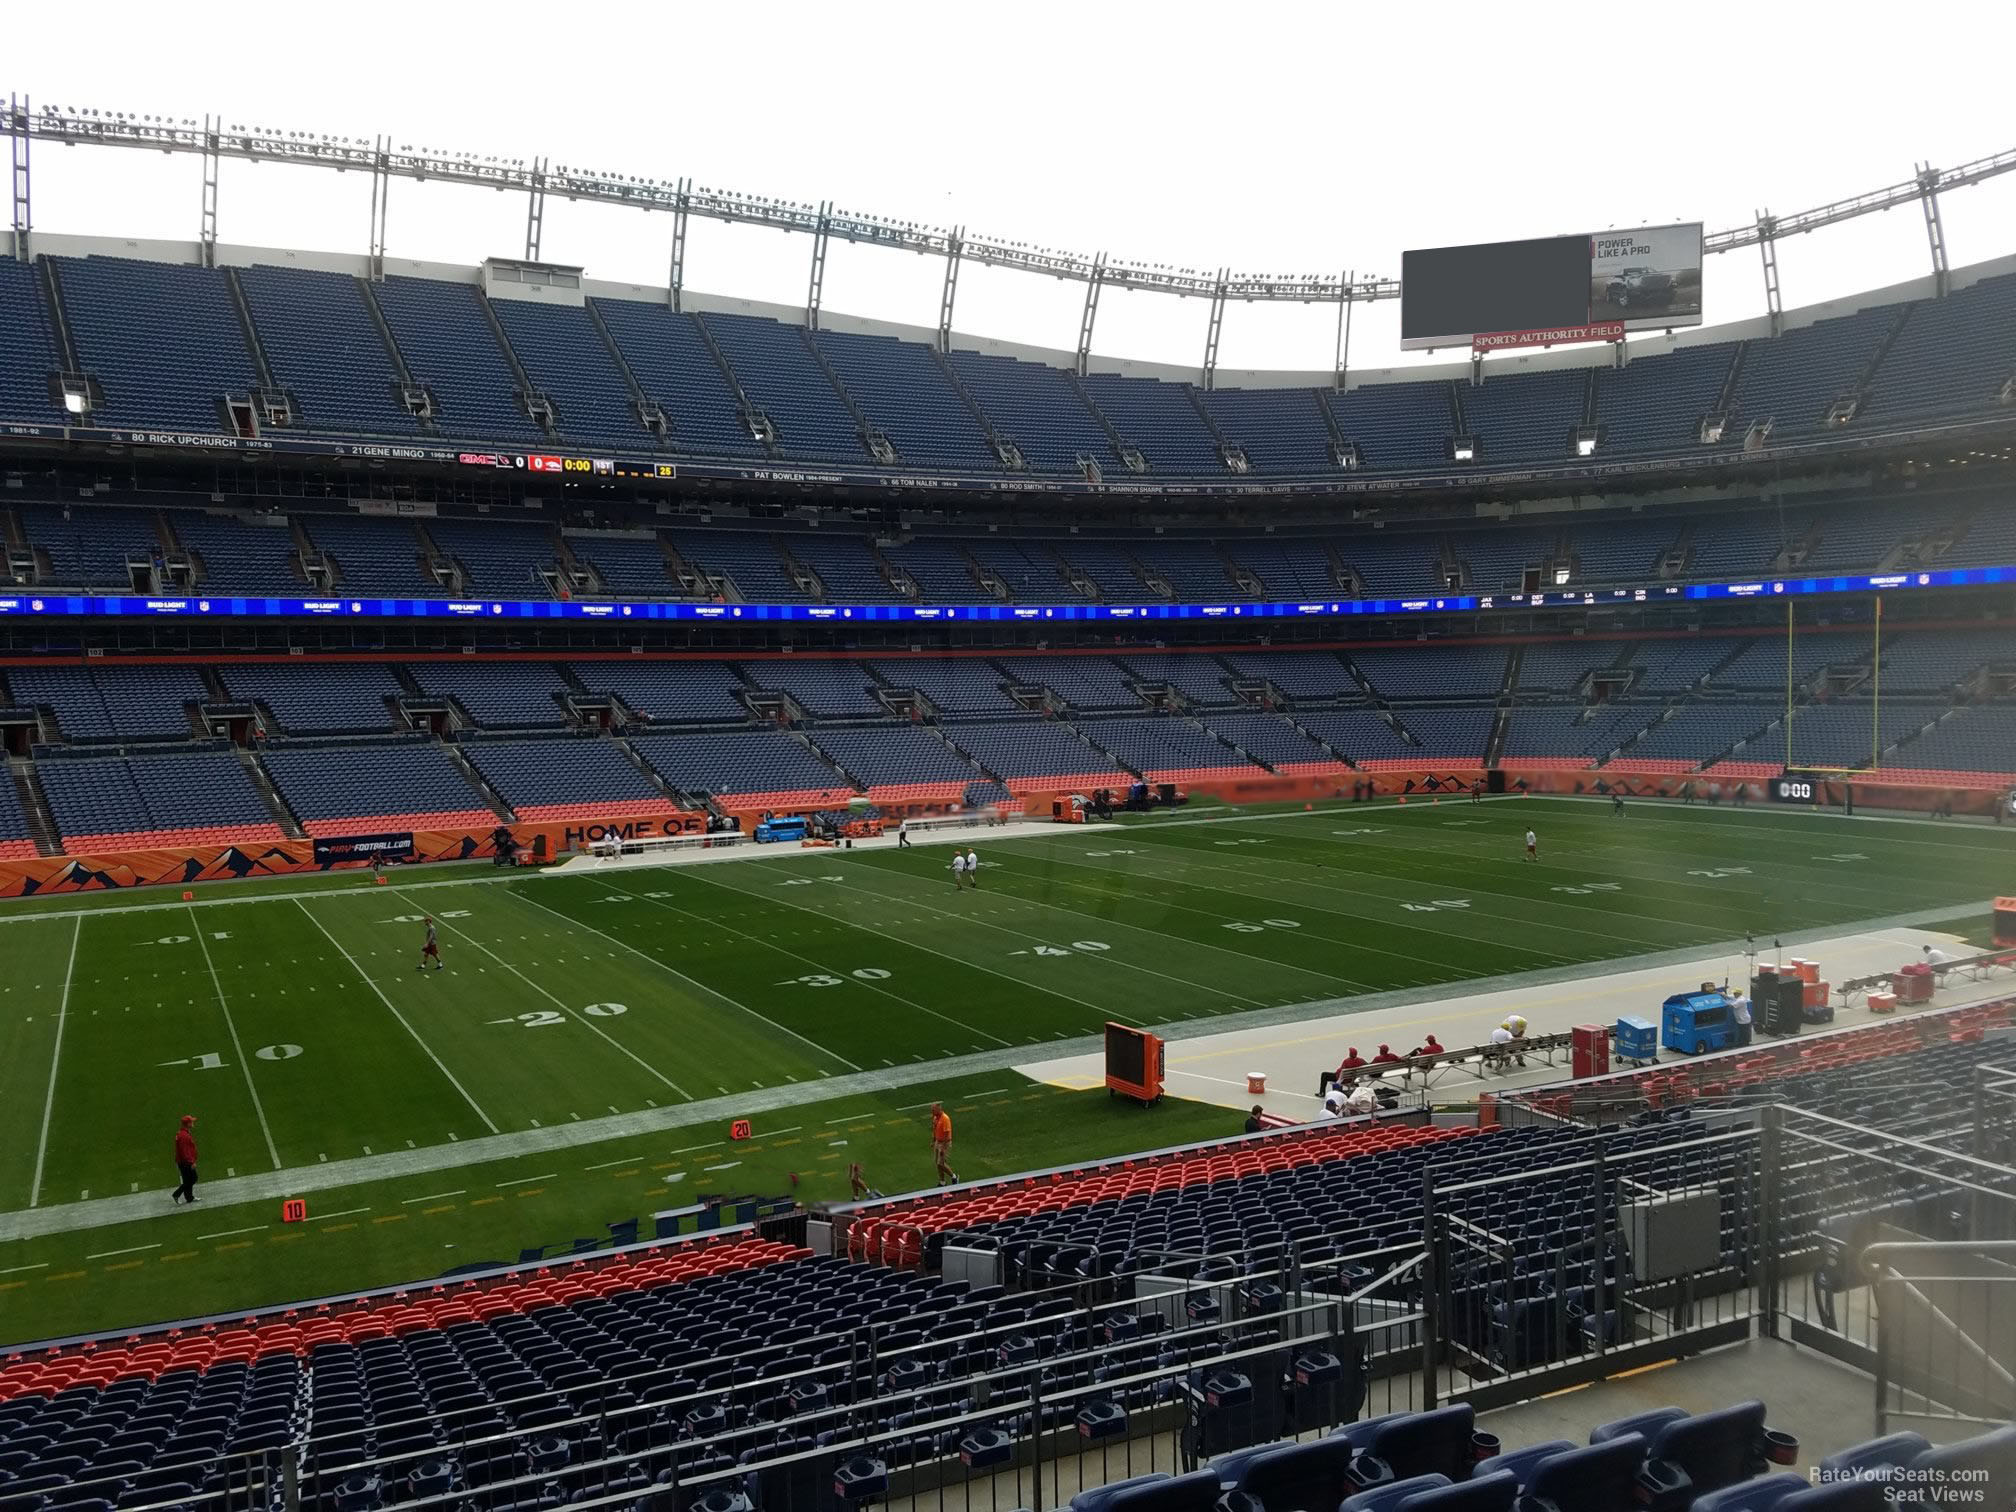 section 126, row 30 seat view  - empower field (at mile high)